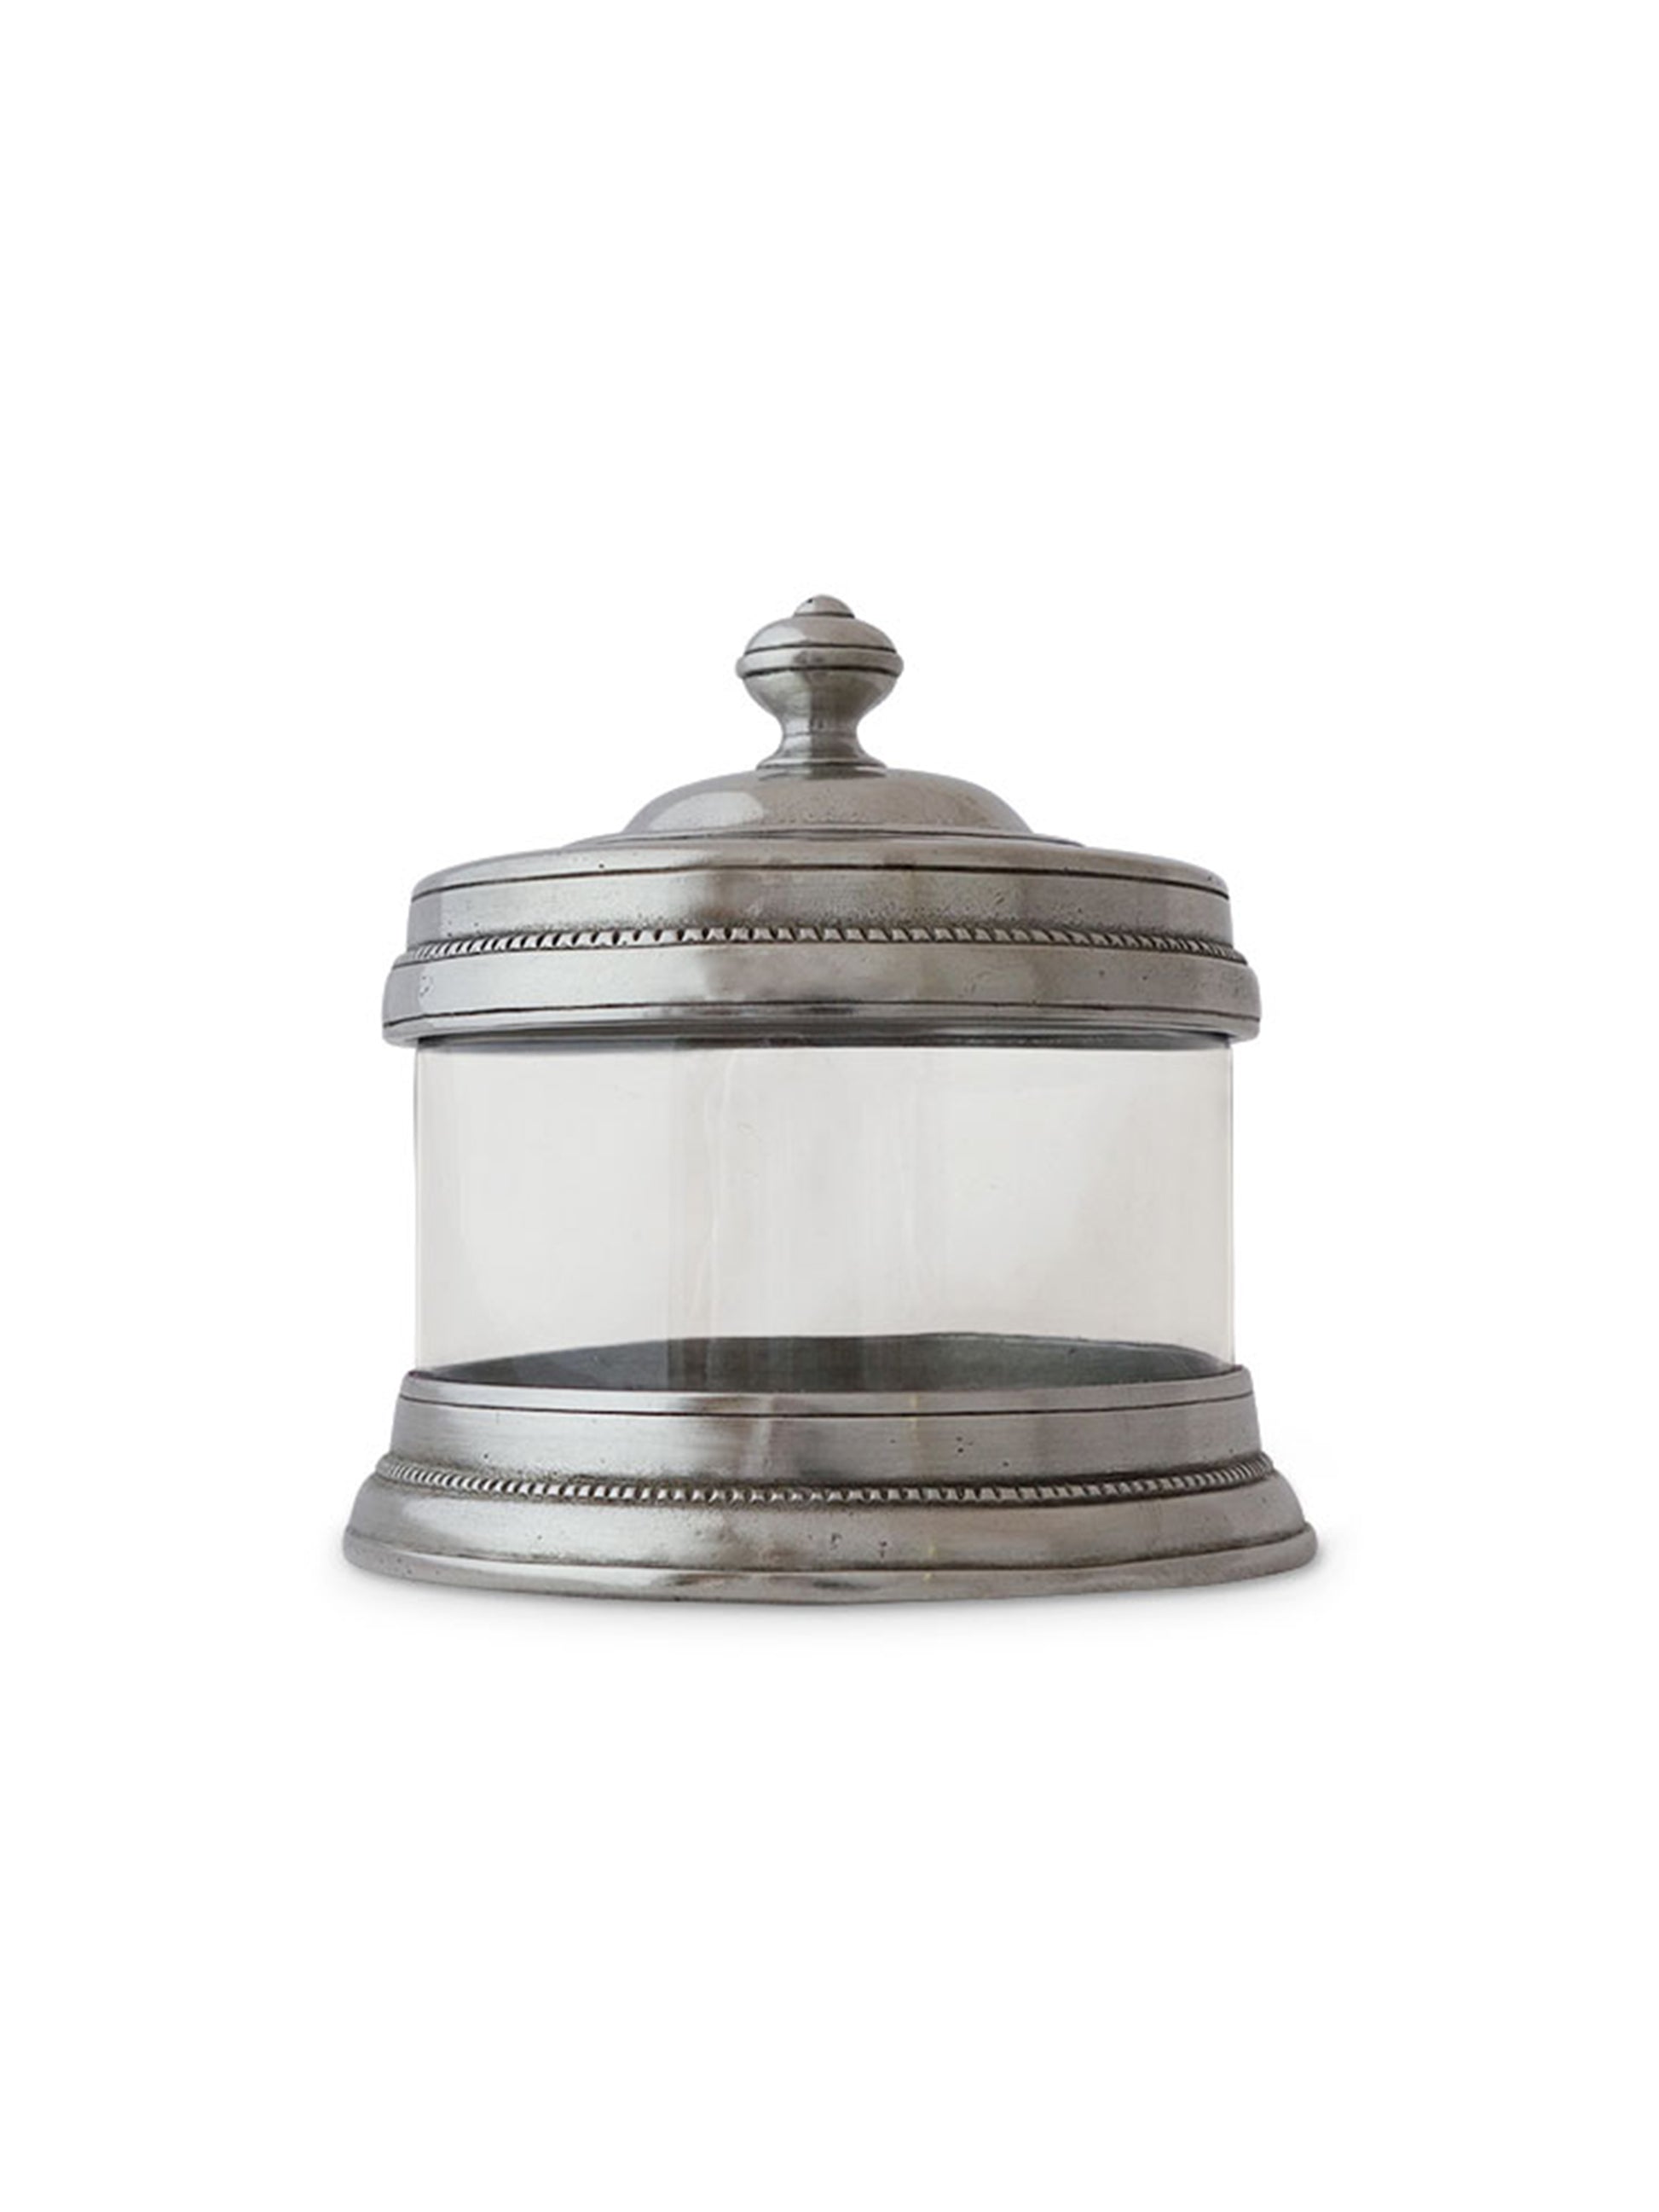 MATCH Pewter Glass Canister Petite Weston Table